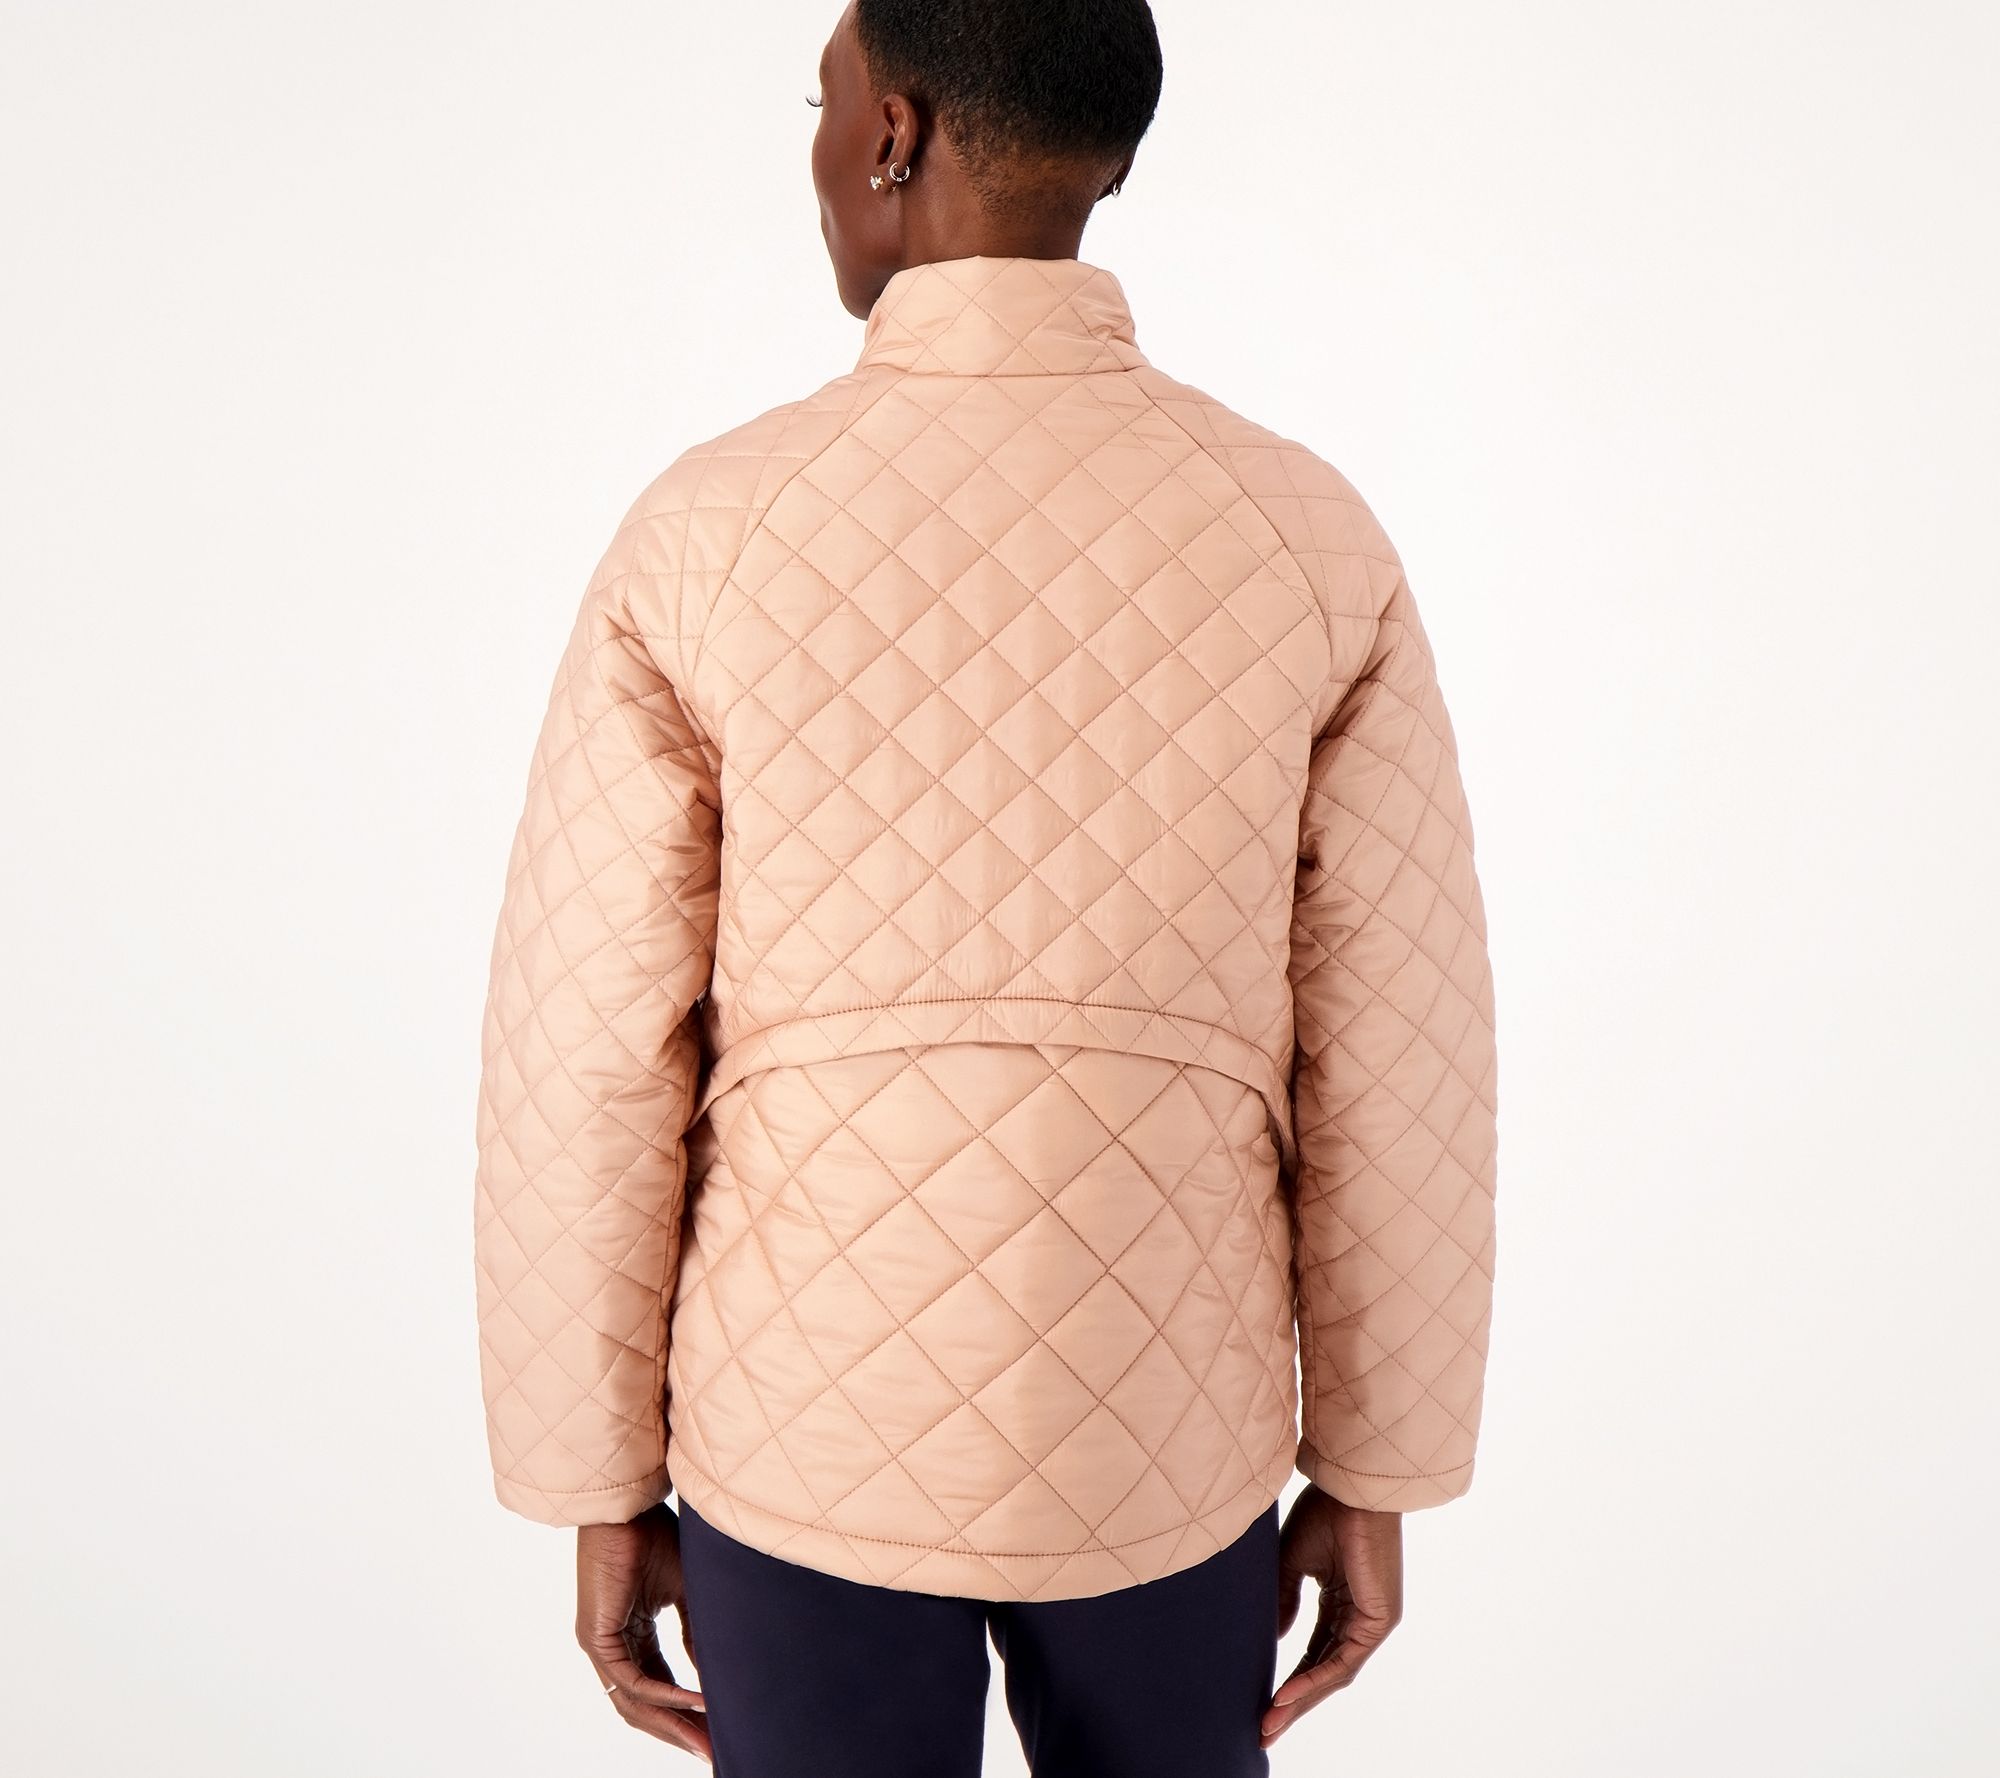 Belle by Kim Gravel Quilted Zip-Front Jacket - QVC.com